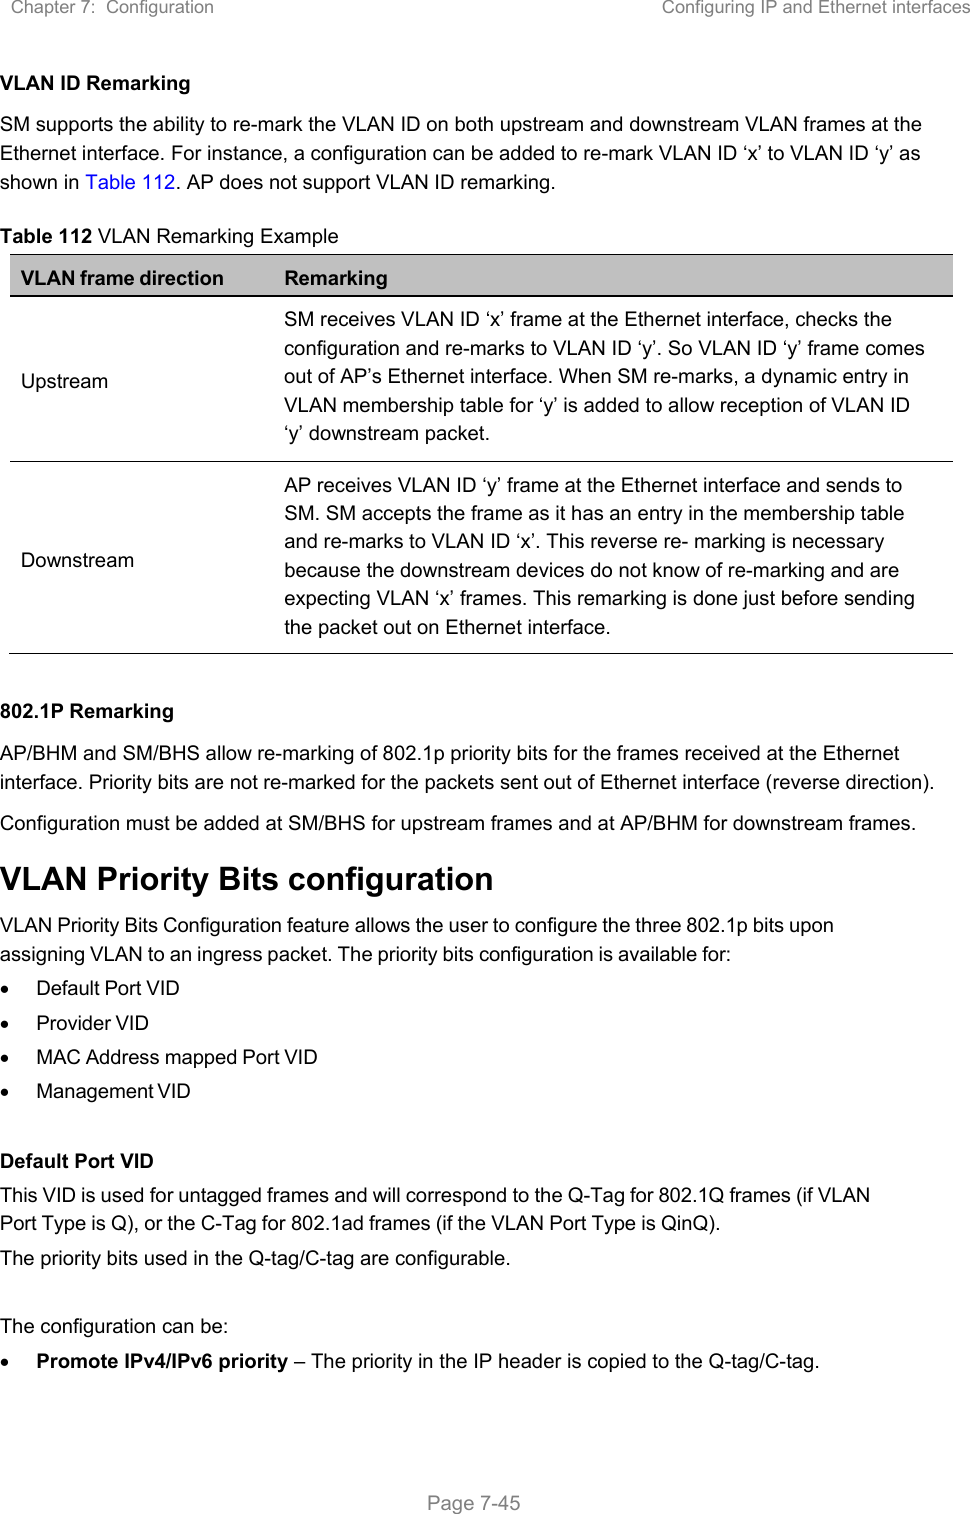 Chapter 7:  Configuration  Configuring IP and Ethernet interfaces   Page 7-45 VLAN ID Remarking SM supports the ability to re-mark the VLAN ID on both upstream and downstream VLAN frames at the Ethernet interface. For instance, a configuration can be added to re-mark VLAN ID ‘x’ to VLAN ID ‘y’ as shown in Table 112. AP does not support VLAN ID remarking. Table 112 VLAN Remarking Example VLAN frame direction Remarking Upstream SM receives VLAN ID ‘x’ frame at the Ethernet interface, checks the configuration and re-marks to VLAN ID ‘y’. So VLAN ID ‘y’ frame comes out of AP’s Ethernet interface. When SM re-marks, a dynamic entry in VLAN membership table for ‘y’ is added to allow reception of VLAN ID ‘y’ downstream packet. Downstream AP receives VLAN ID ‘y’ frame at the Ethernet interface and sends to SM. SM accepts the frame as it has an entry in the membership table and re-marks to VLAN ID ‘x’. This reverse re- marking is necessary because the downstream devices do not know of re-marking and are expecting VLAN ‘x’ frames. This remarking is done just before sending the packet out on Ethernet interface.  802.1P Remarking AP/BHM and SM/BHS allow re-marking of 802.1p priority bits for the frames received at the Ethernet interface. Priority bits are not re-marked for the packets sent out of Ethernet interface (reverse direction). Configuration must be added at SM/BHS for upstream frames and at AP/BHM for downstream frames. VLAN Priority Bits configuration VLAN Priority Bits Configuration feature allows the user to configure the three 802.1p bits upon assigning VLAN to an ingress packet. The priority bits configuration is available for:   Default Port VID   Provider VID   MAC Address mapped Port VID   Management VID  Default Port VID This VID is used for untagged frames and will correspond to the Q-Tag for 802.1Q frames (if VLAN Port Type is Q), or the C-Tag for 802.1ad frames (if the VLAN Port Type is QinQ). The priority bits used in the Q-tag/C-tag are configurable.   The configuration can be:  Promote IPv4/IPv6 priority – The priority in the IP header is copied to the Q-tag/C-tag. 